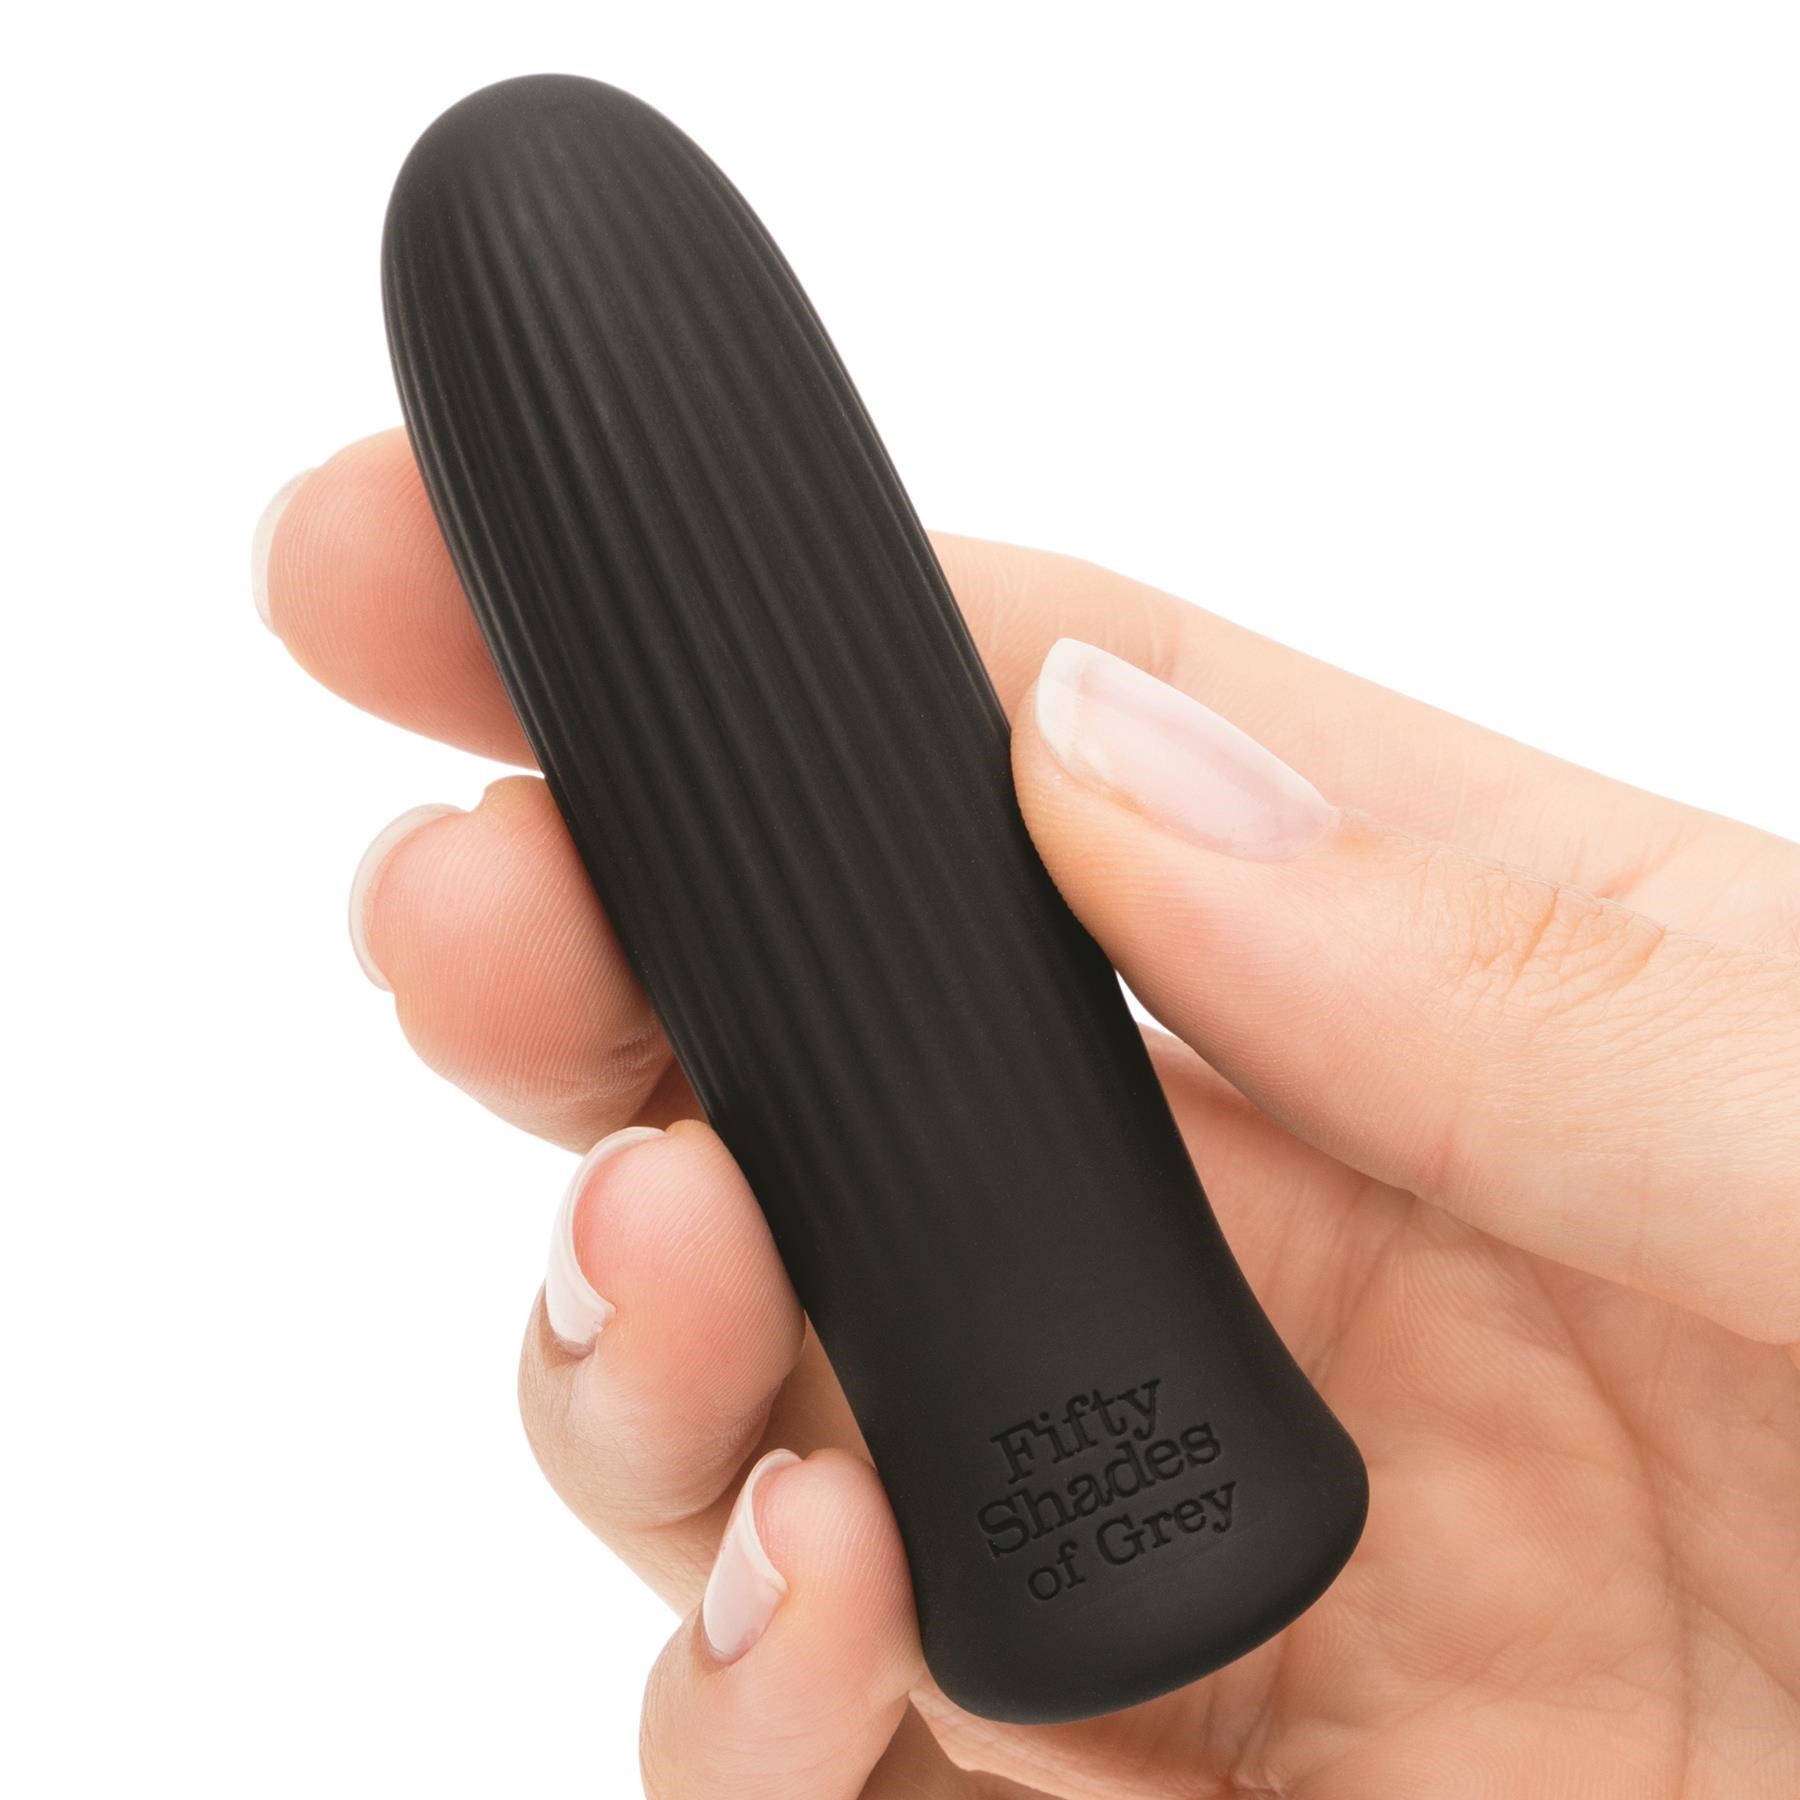 Fifty Shades of Grey Sensation Bullet Vibrator Hand Shot to Show Size